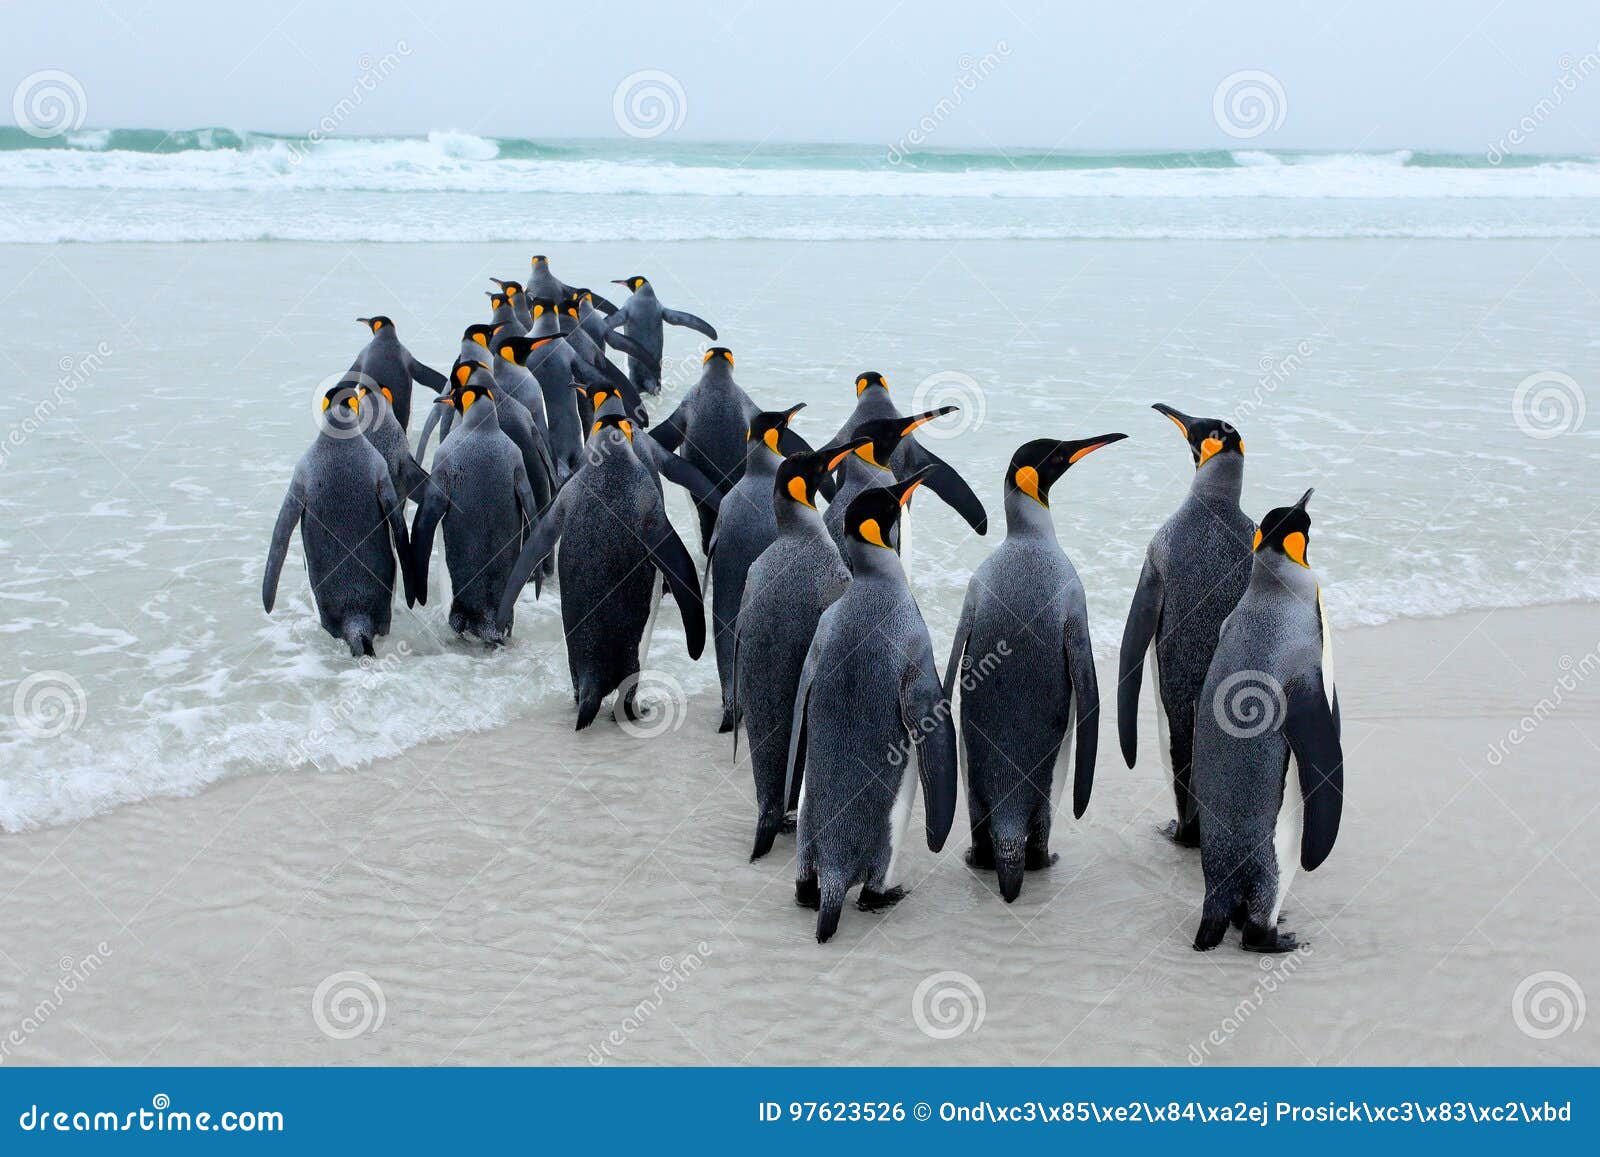 group of king penguins, aptenodytes patagonicus, going from white sand to sea, artic animals in the nature habitat, dark blue sky,